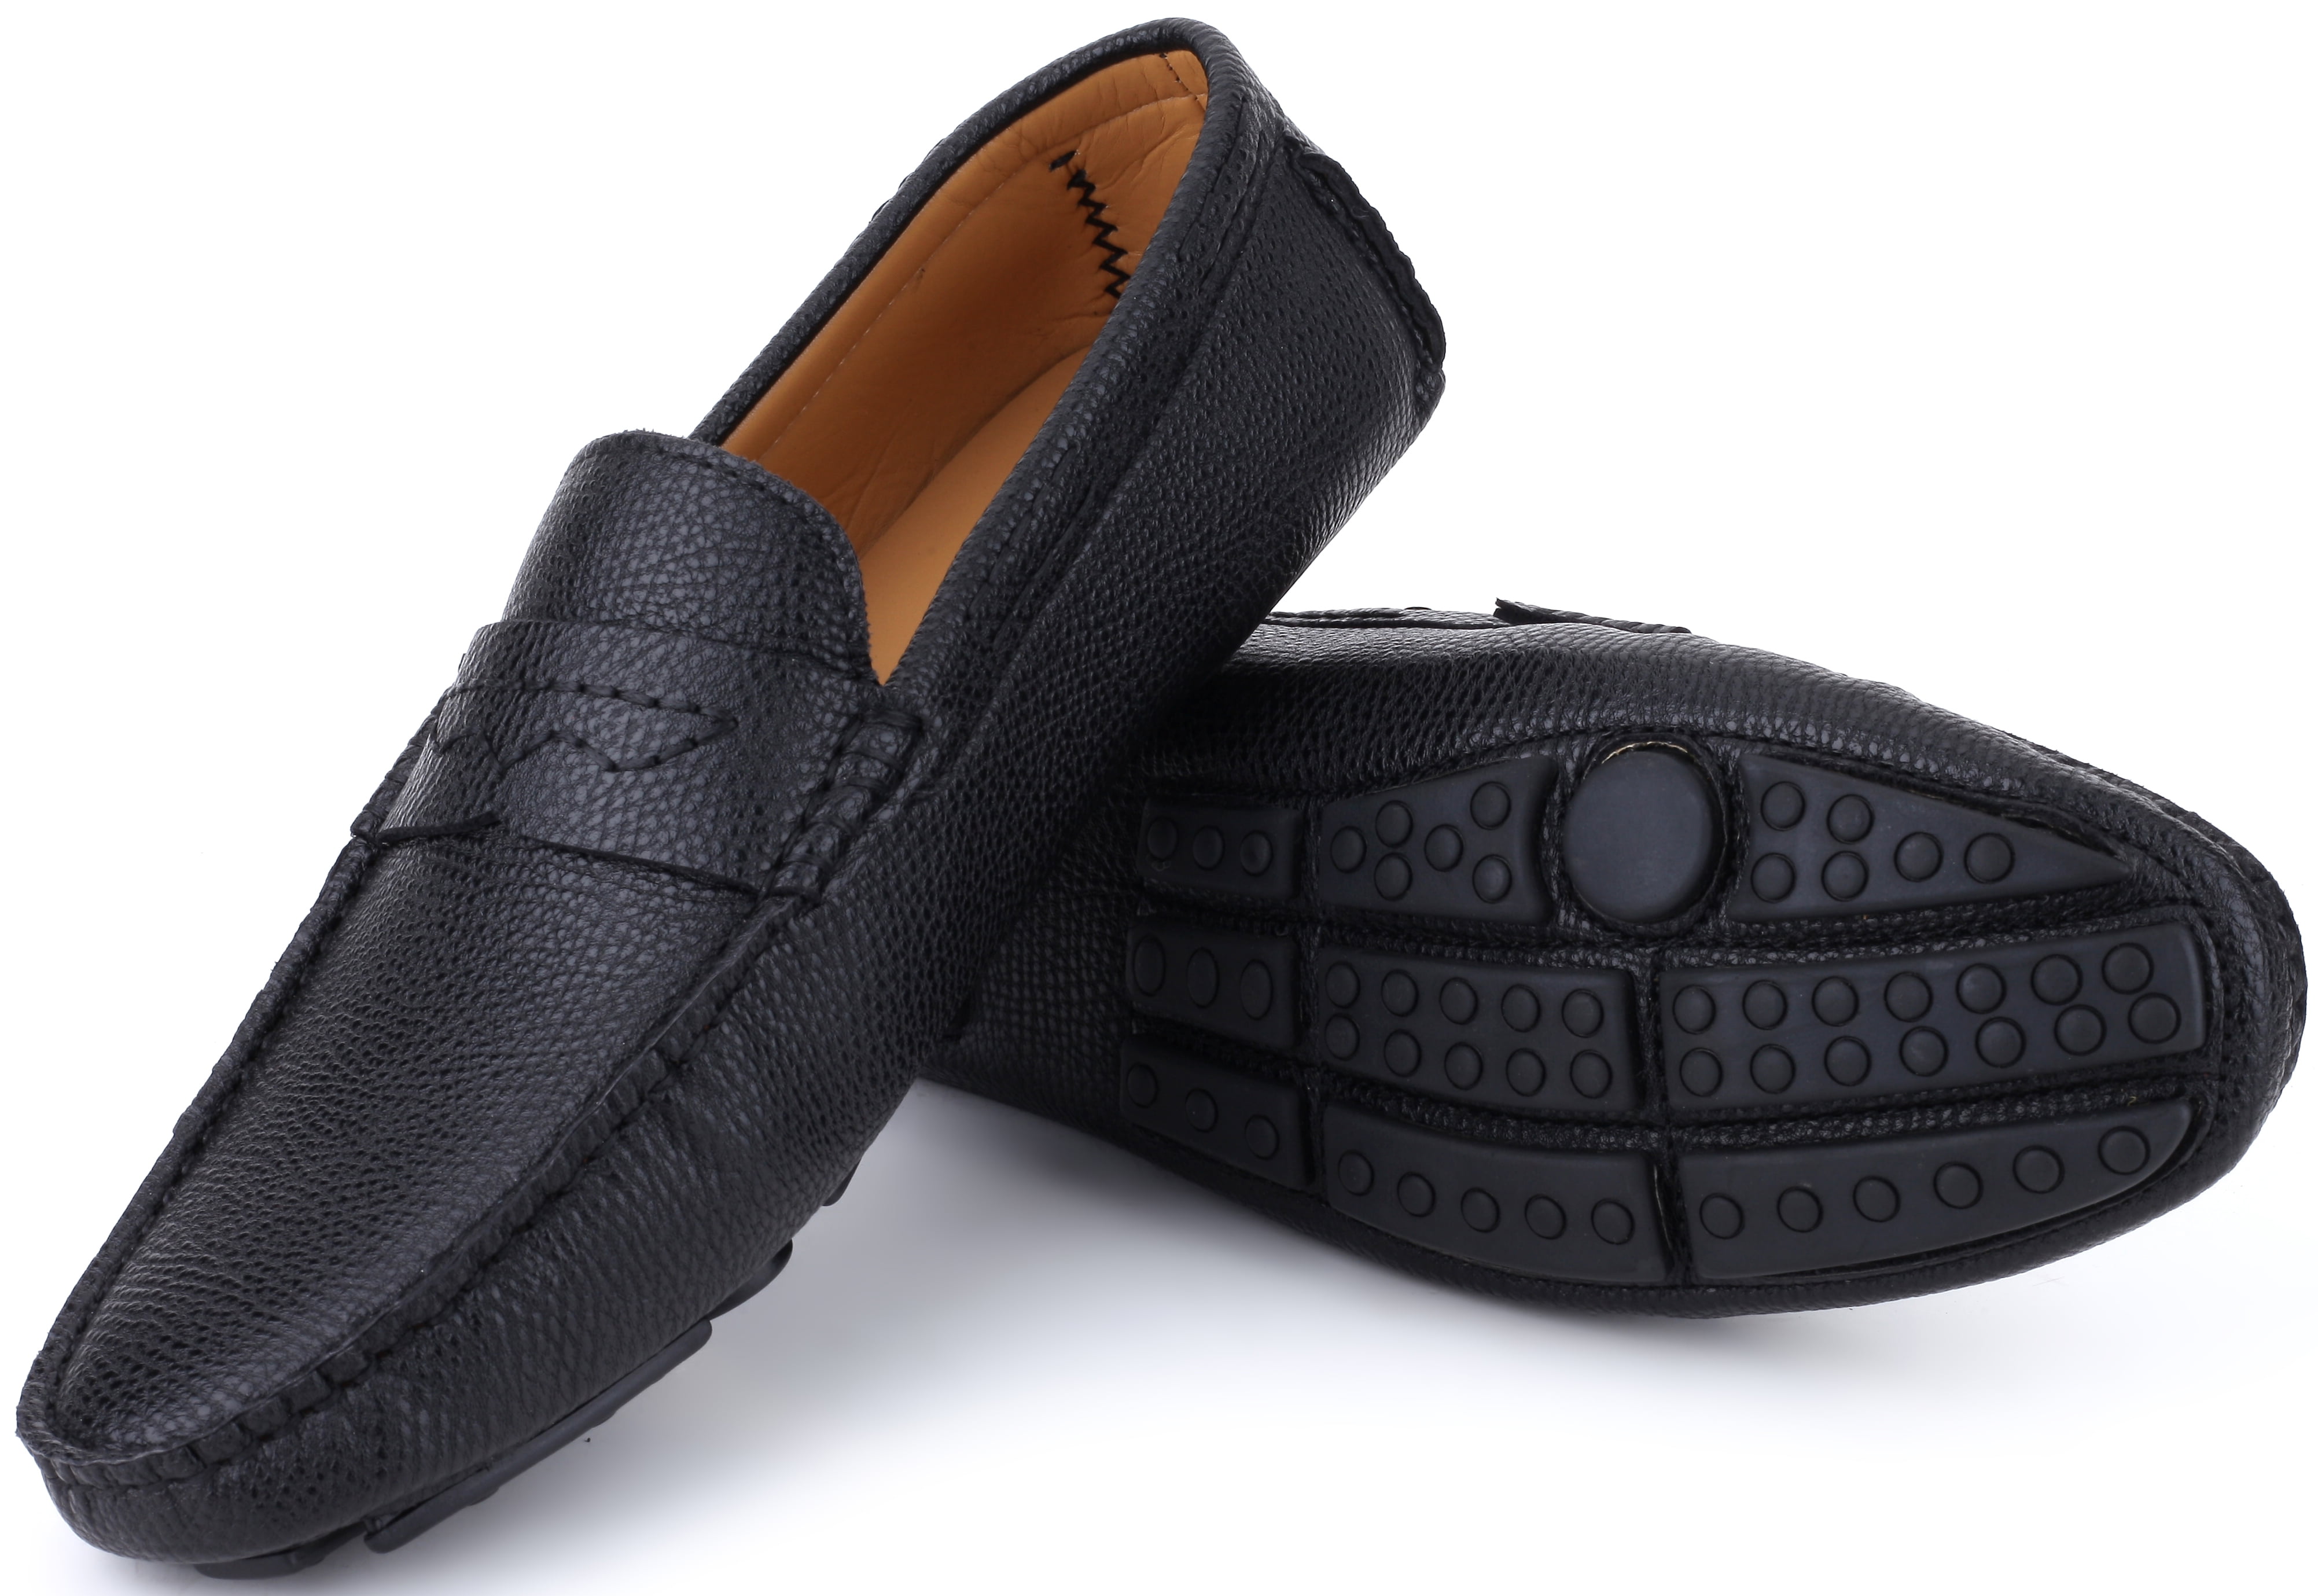 94 Casual Casual men loafers shoes Combine with Best Outfit